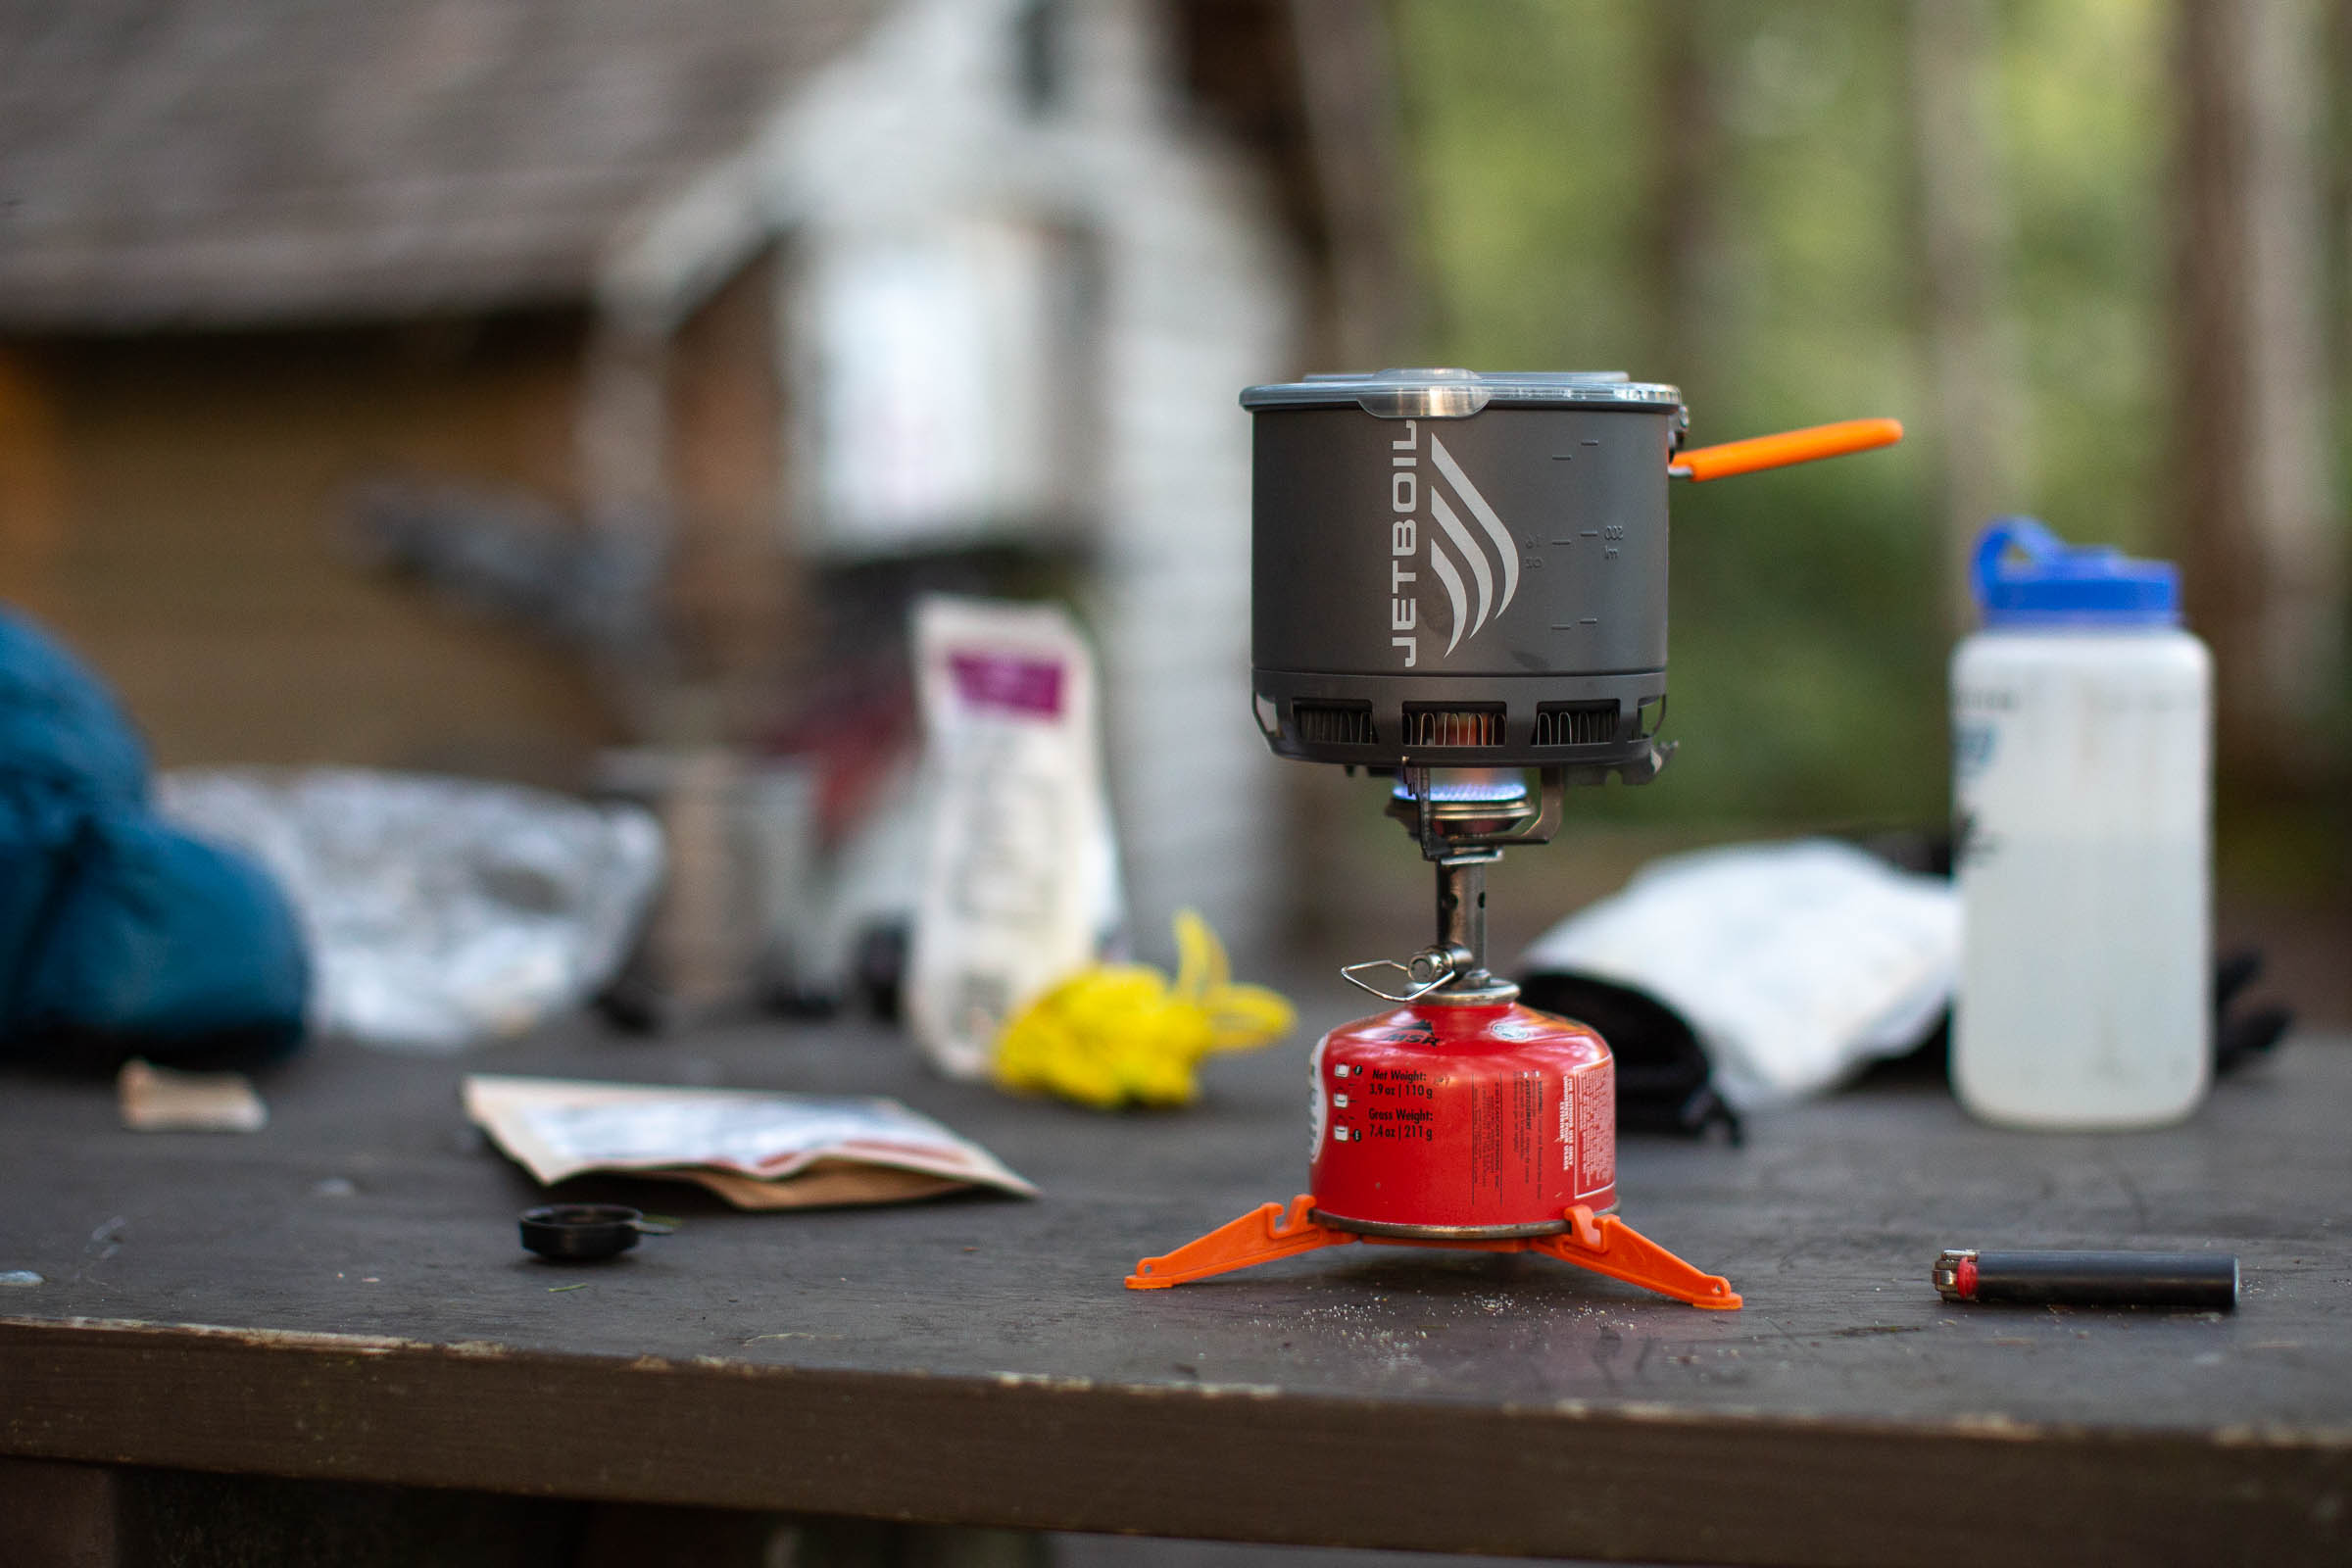 Jetboil Stash Review: The Complete Kit - BIKEPACKING.com